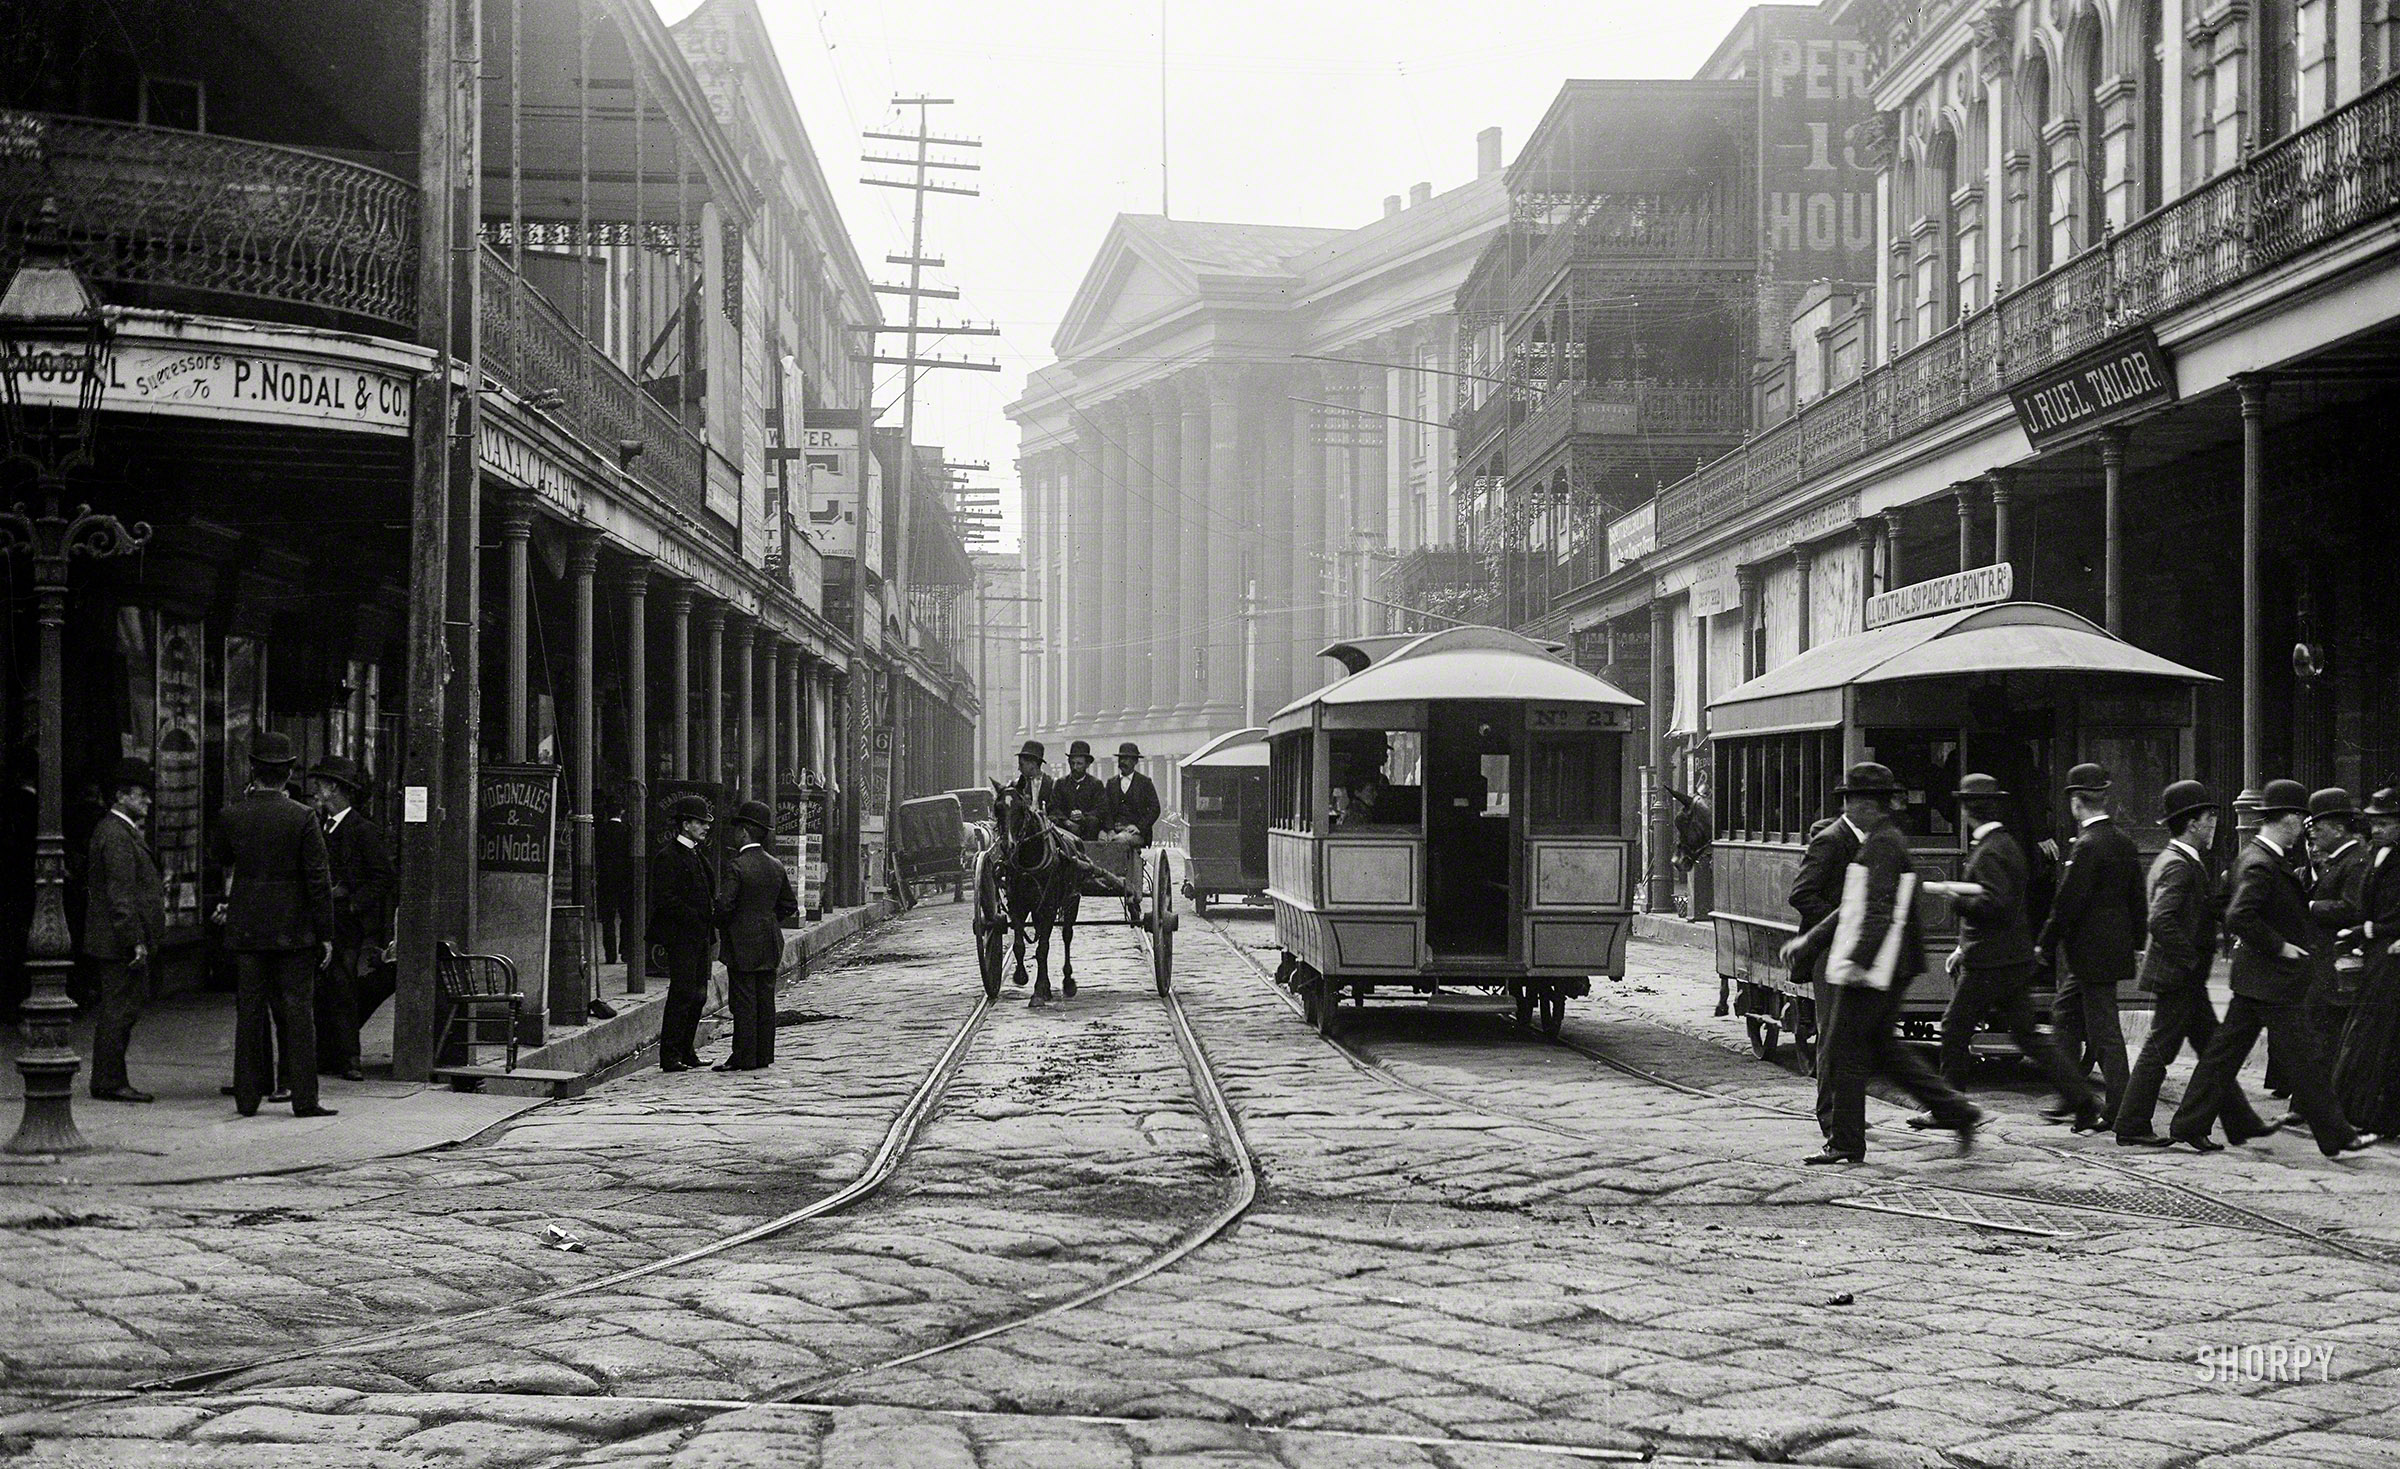 New Orleans circa 1890. "St. Charles Hotel from Canal Street." 5x7 inch glass negative by William Henry Jackson. View full size.